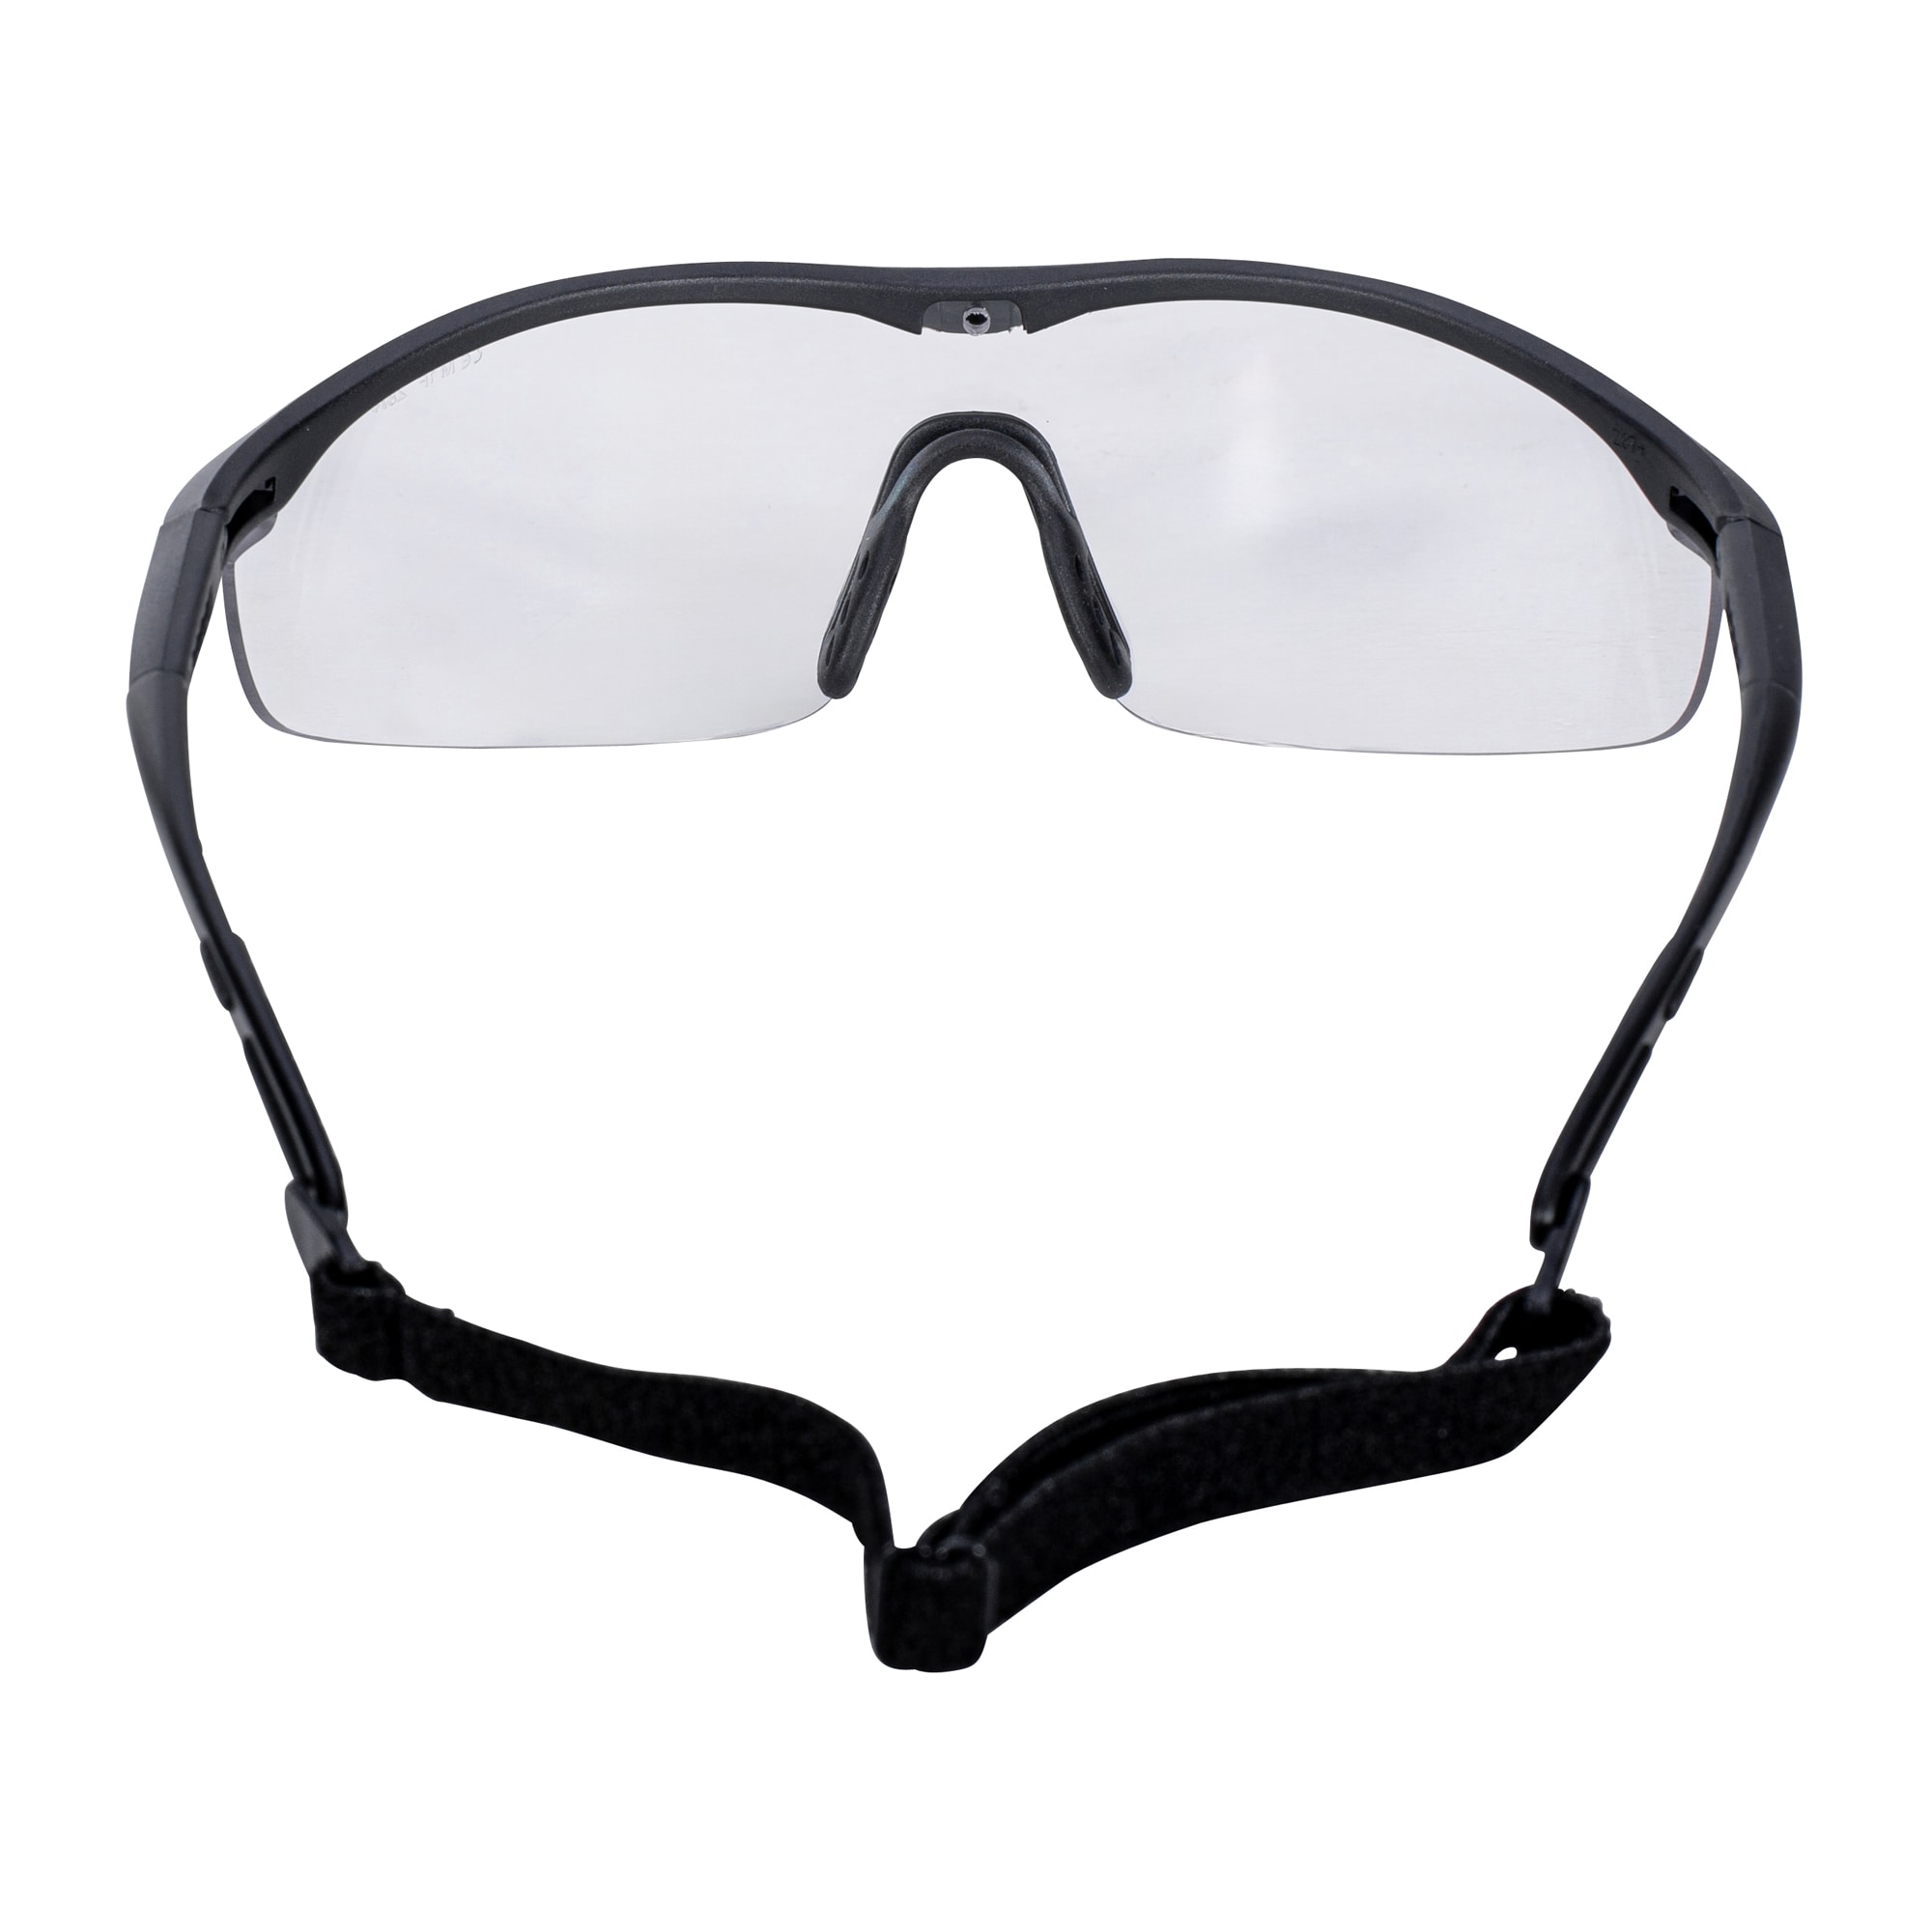 Purchase The Mil Tec Safety Glasses Set Ansi En 166 By Asmc